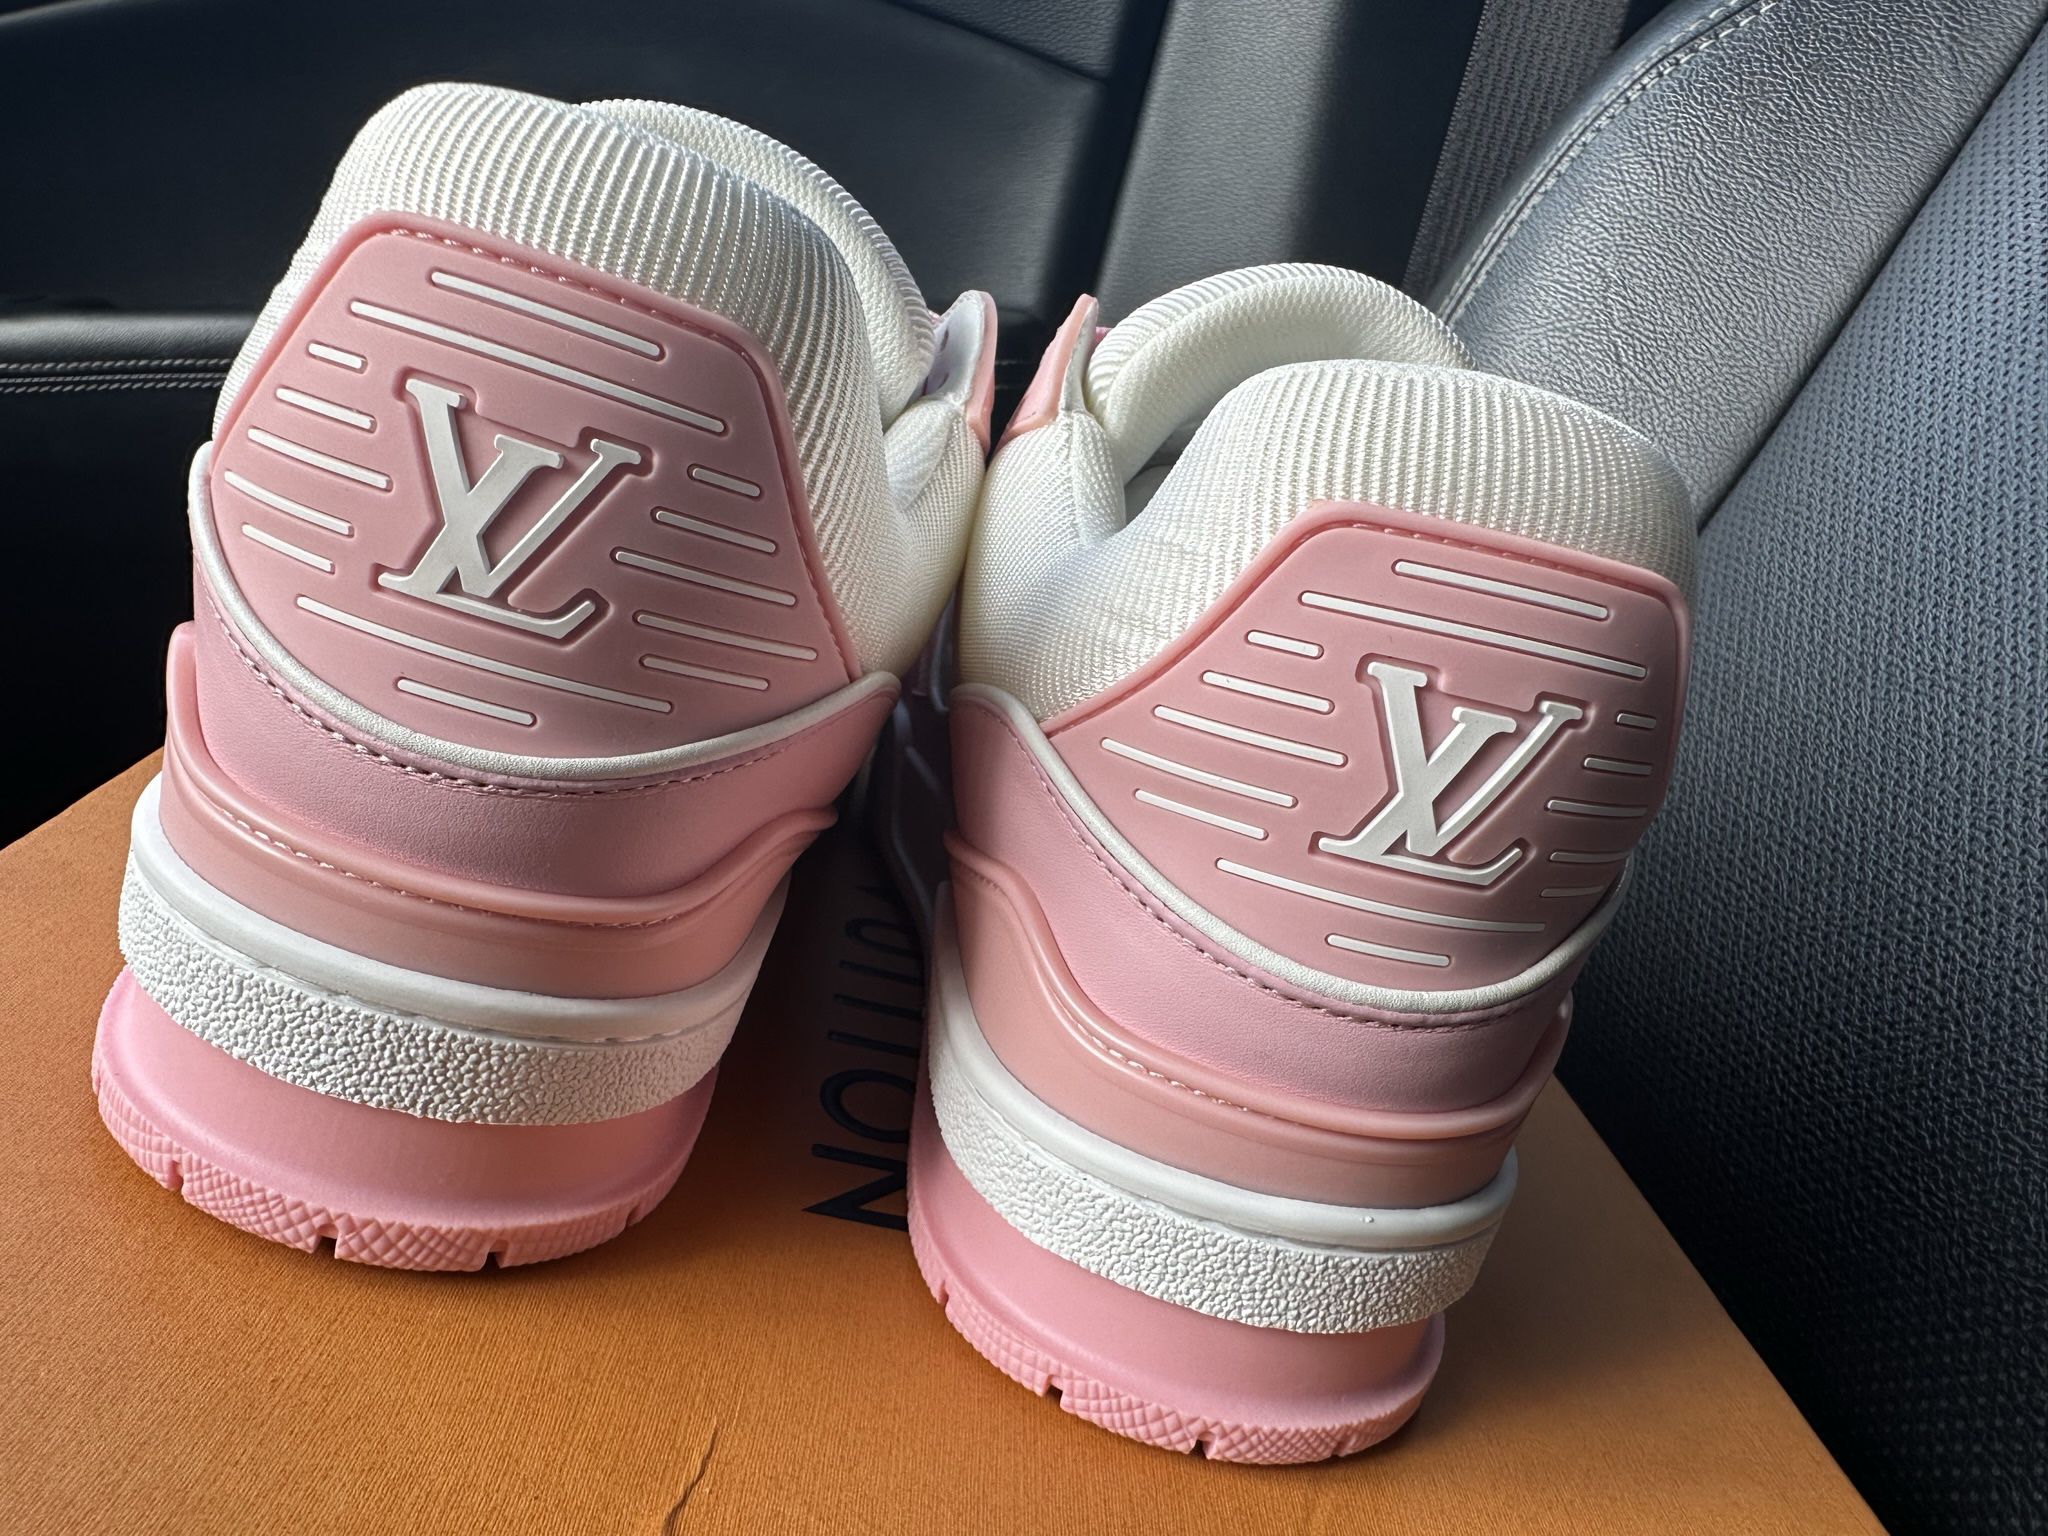 Pink Rose Louis Vuitton Trainers for Sale in West Hollywood, CA